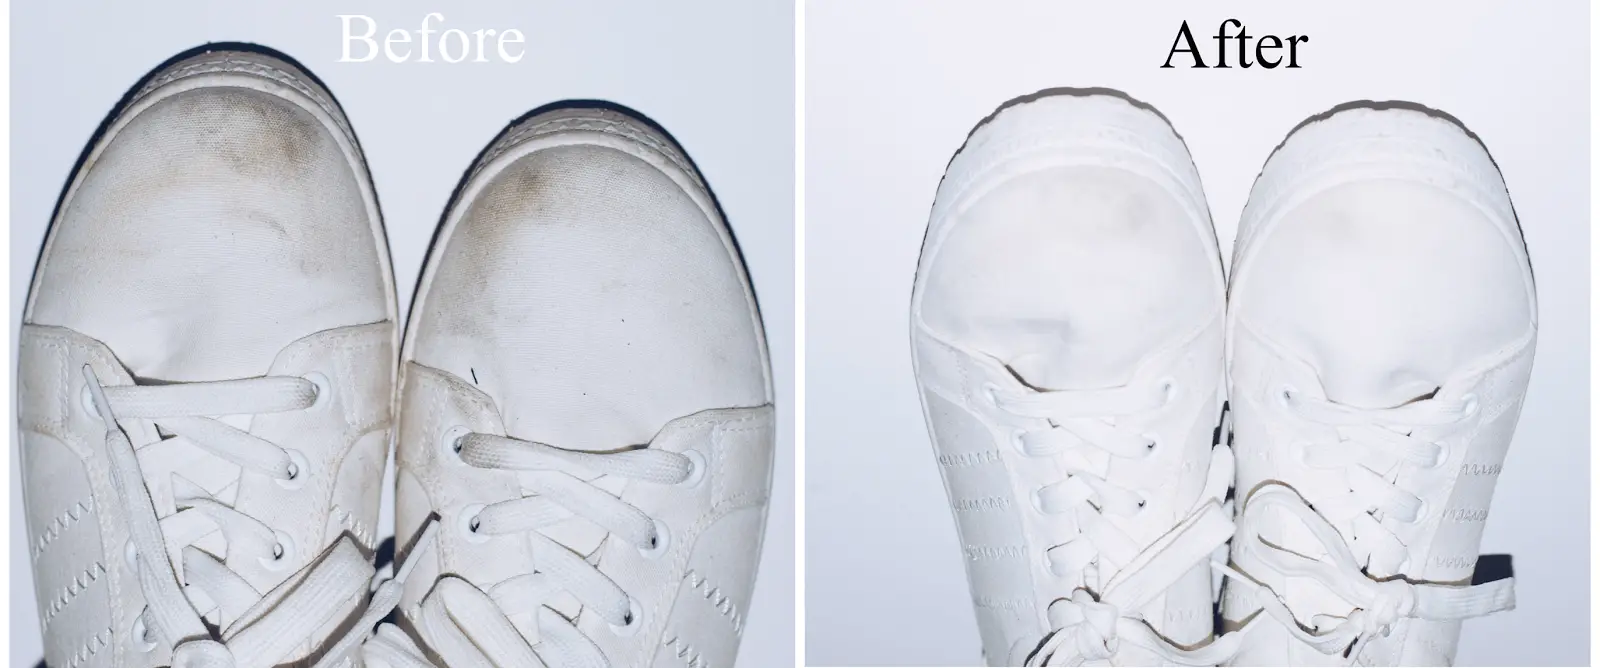 How to get White Shoes again